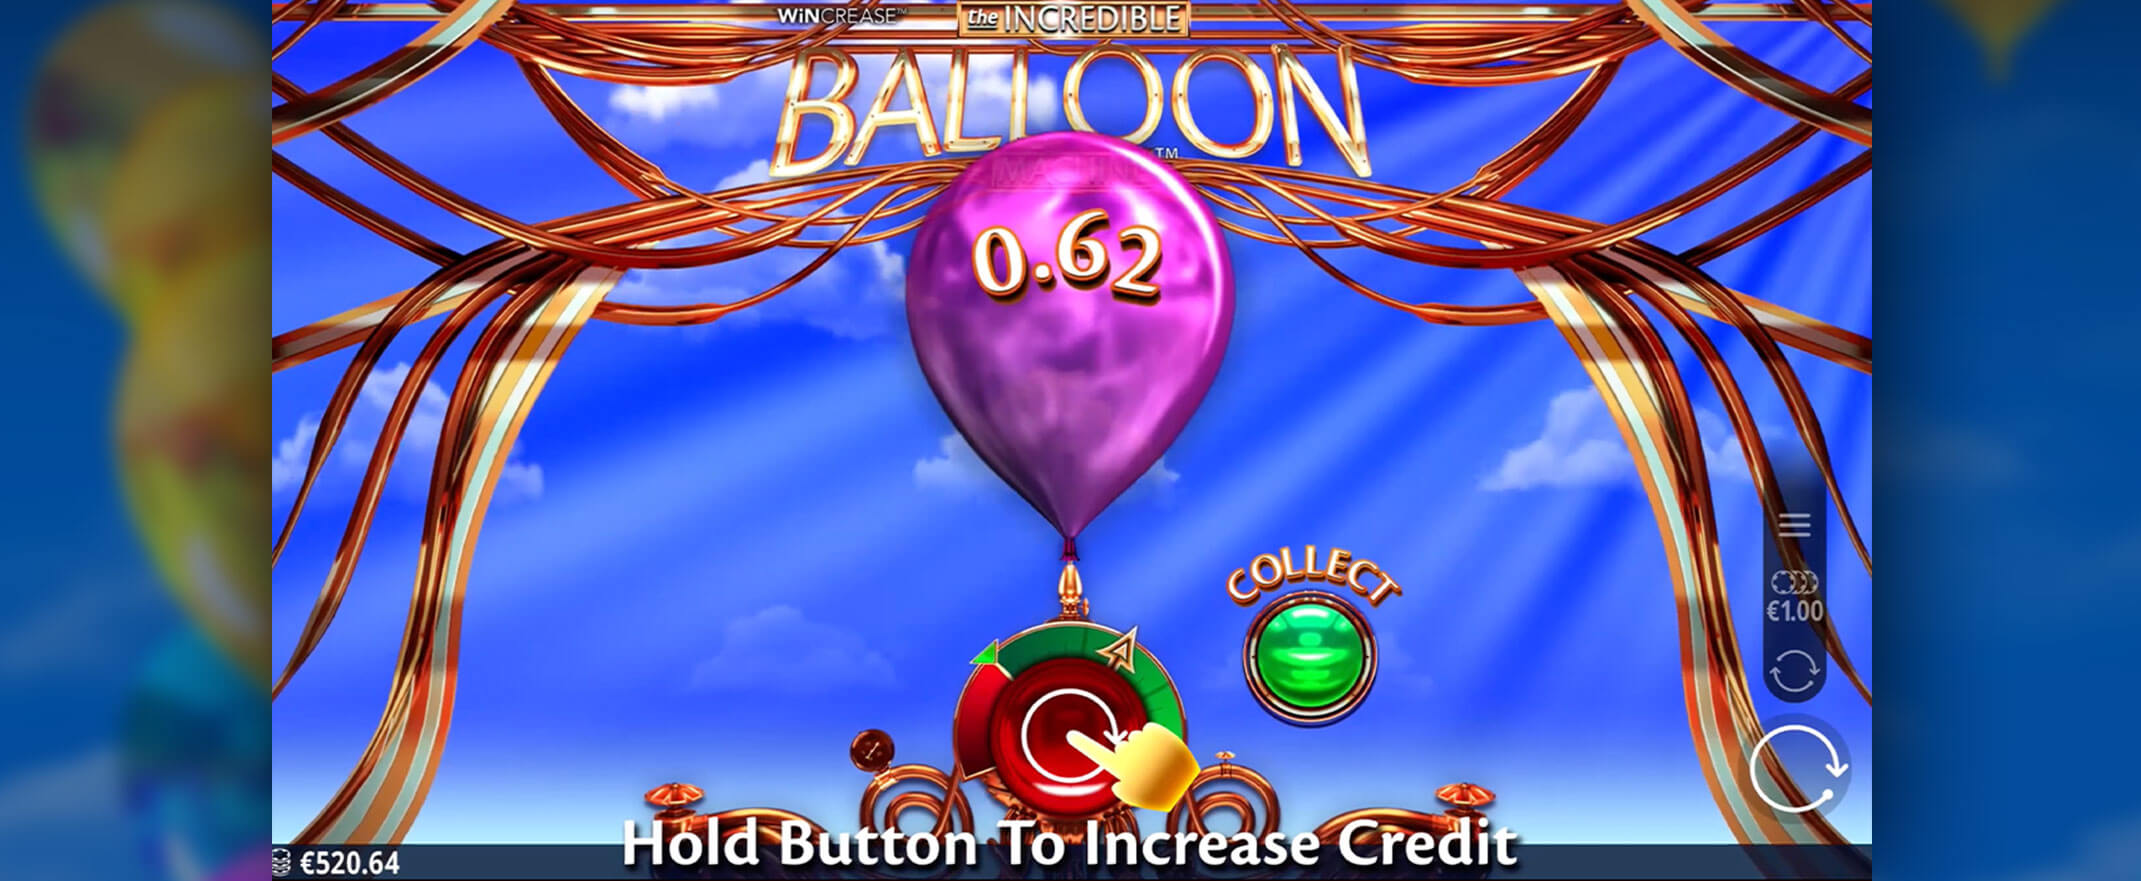 The Incredible Balloon Machine Slot Review